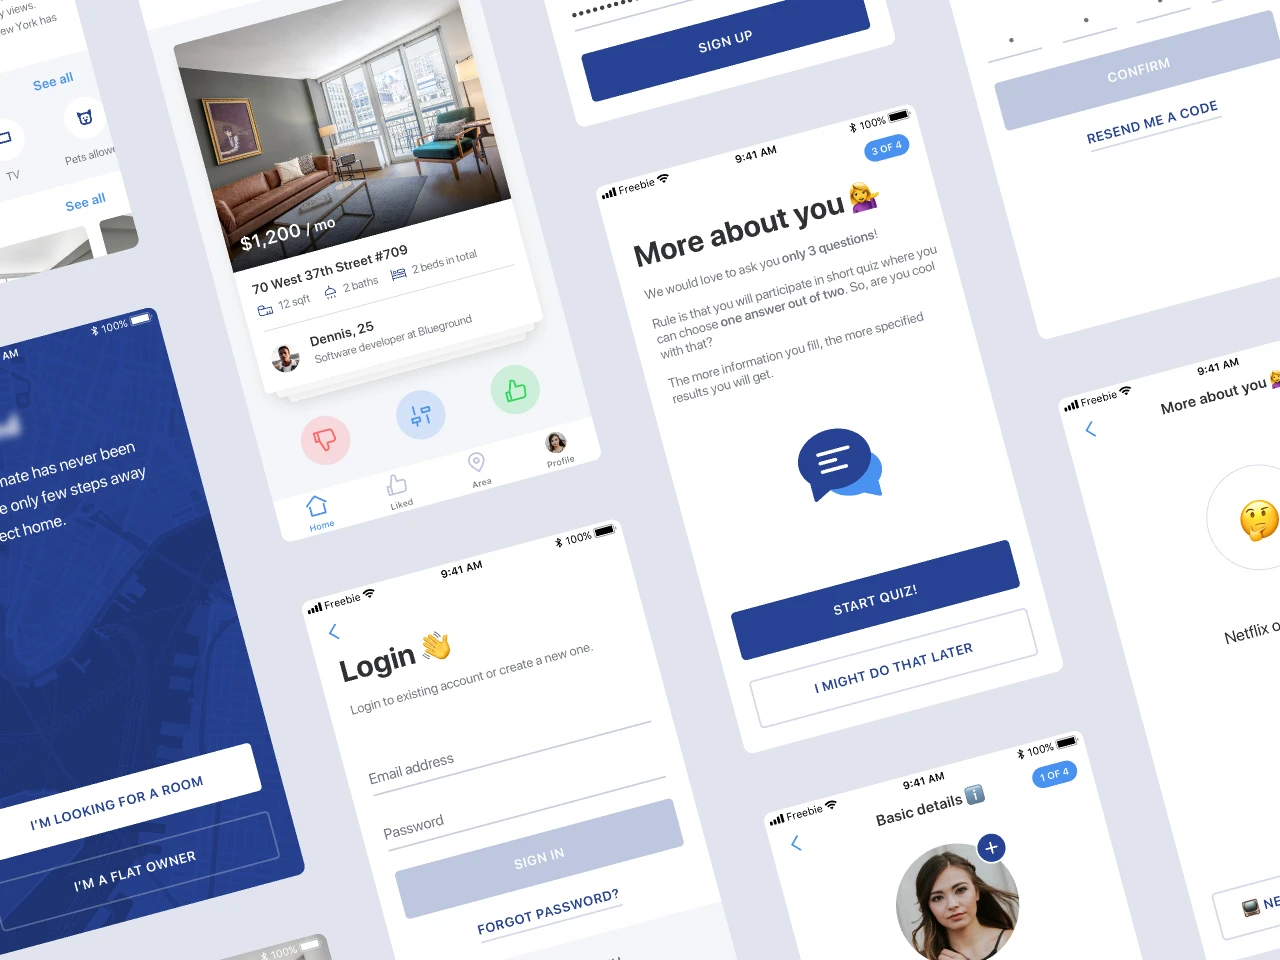 Find a Roommate UI Kit for Figma and Adobe XD